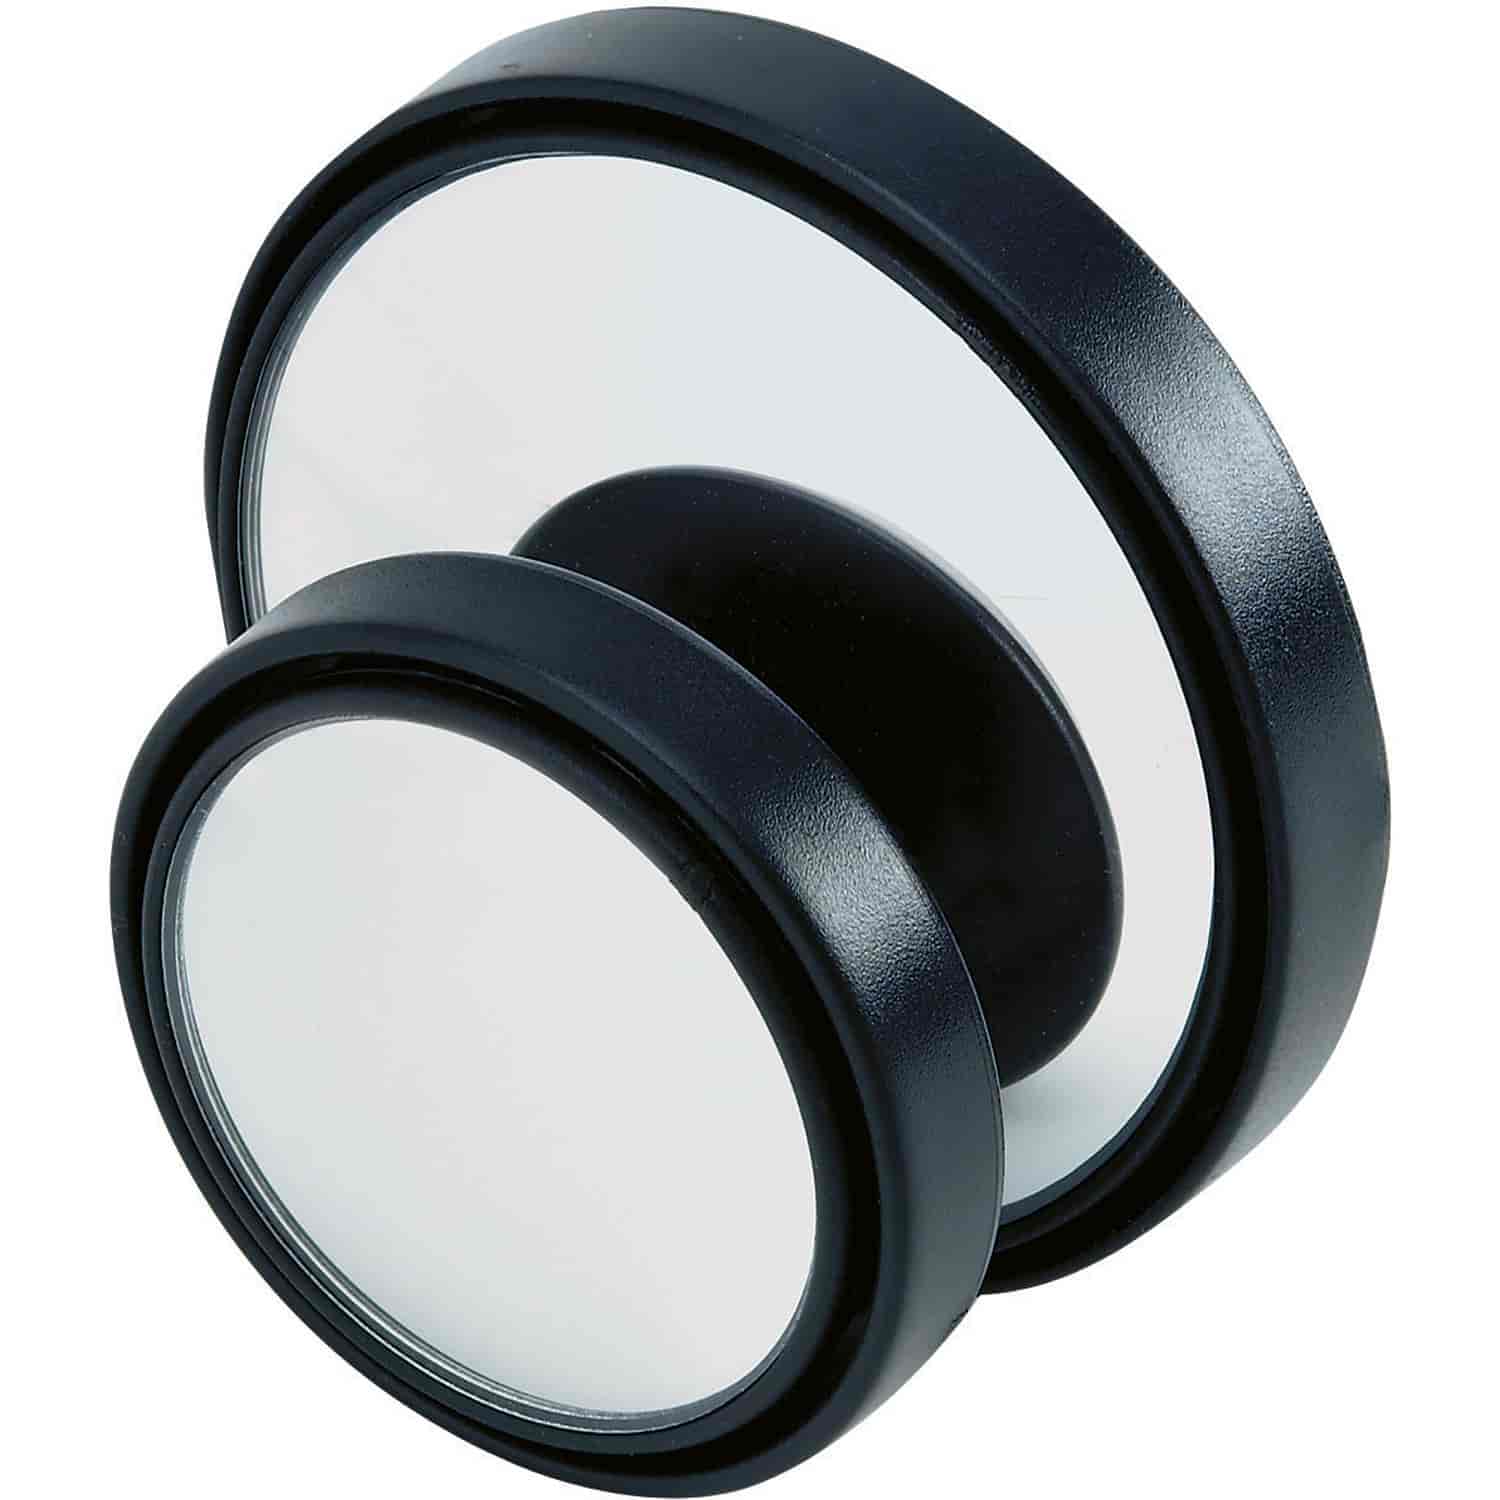 Stick-On Round Mirror This mirror is 2 inches